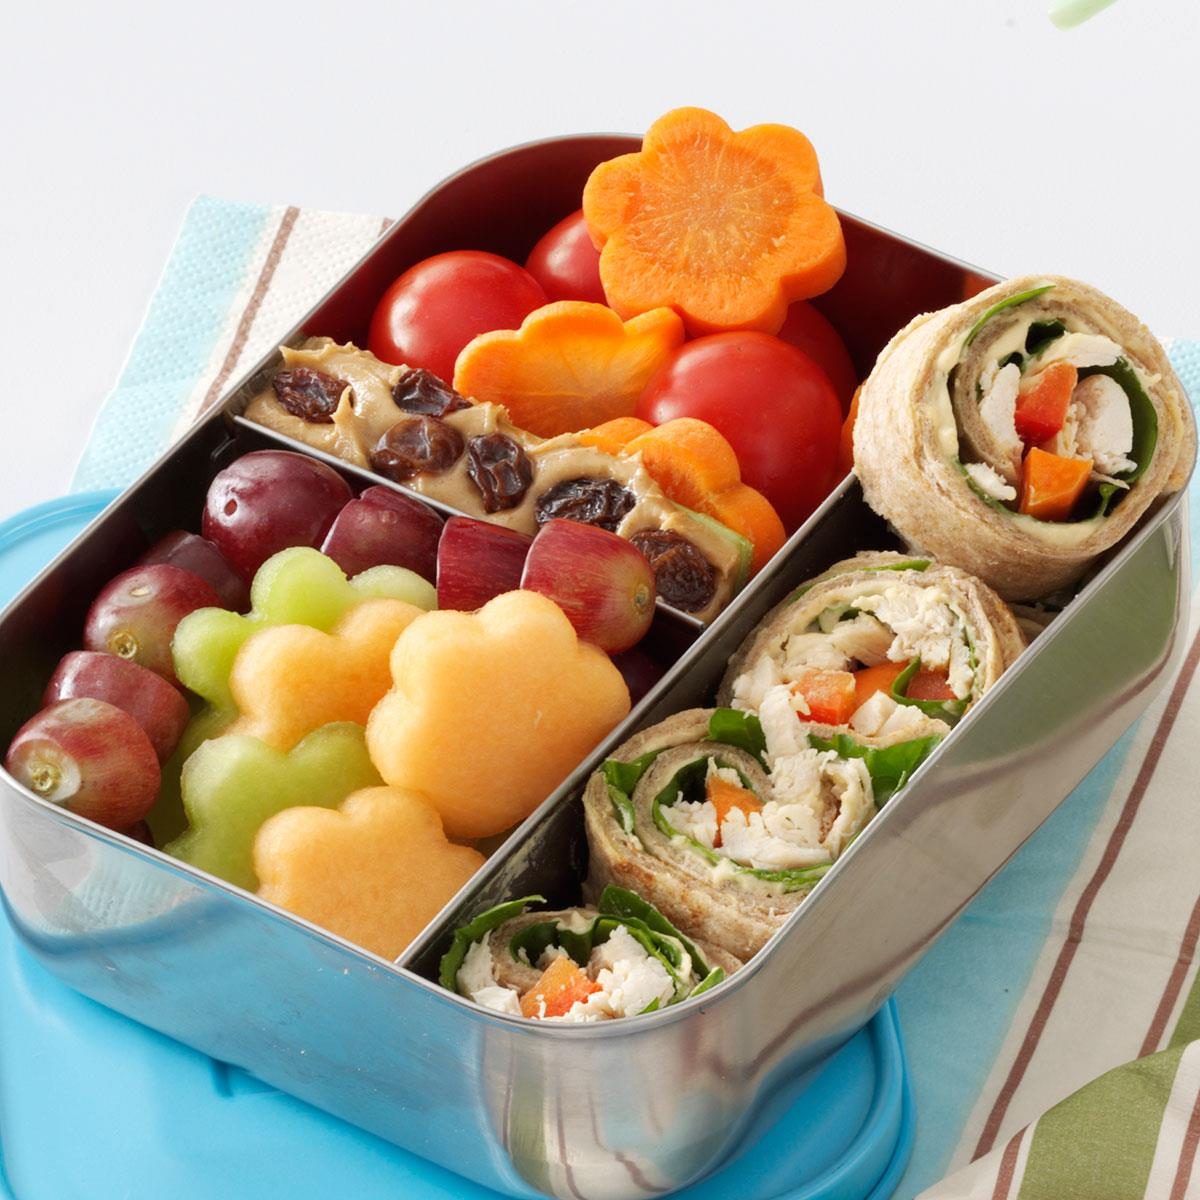 Simple, Whole Food Pack Ahead Lunch Ideas for Kids – Treehouse